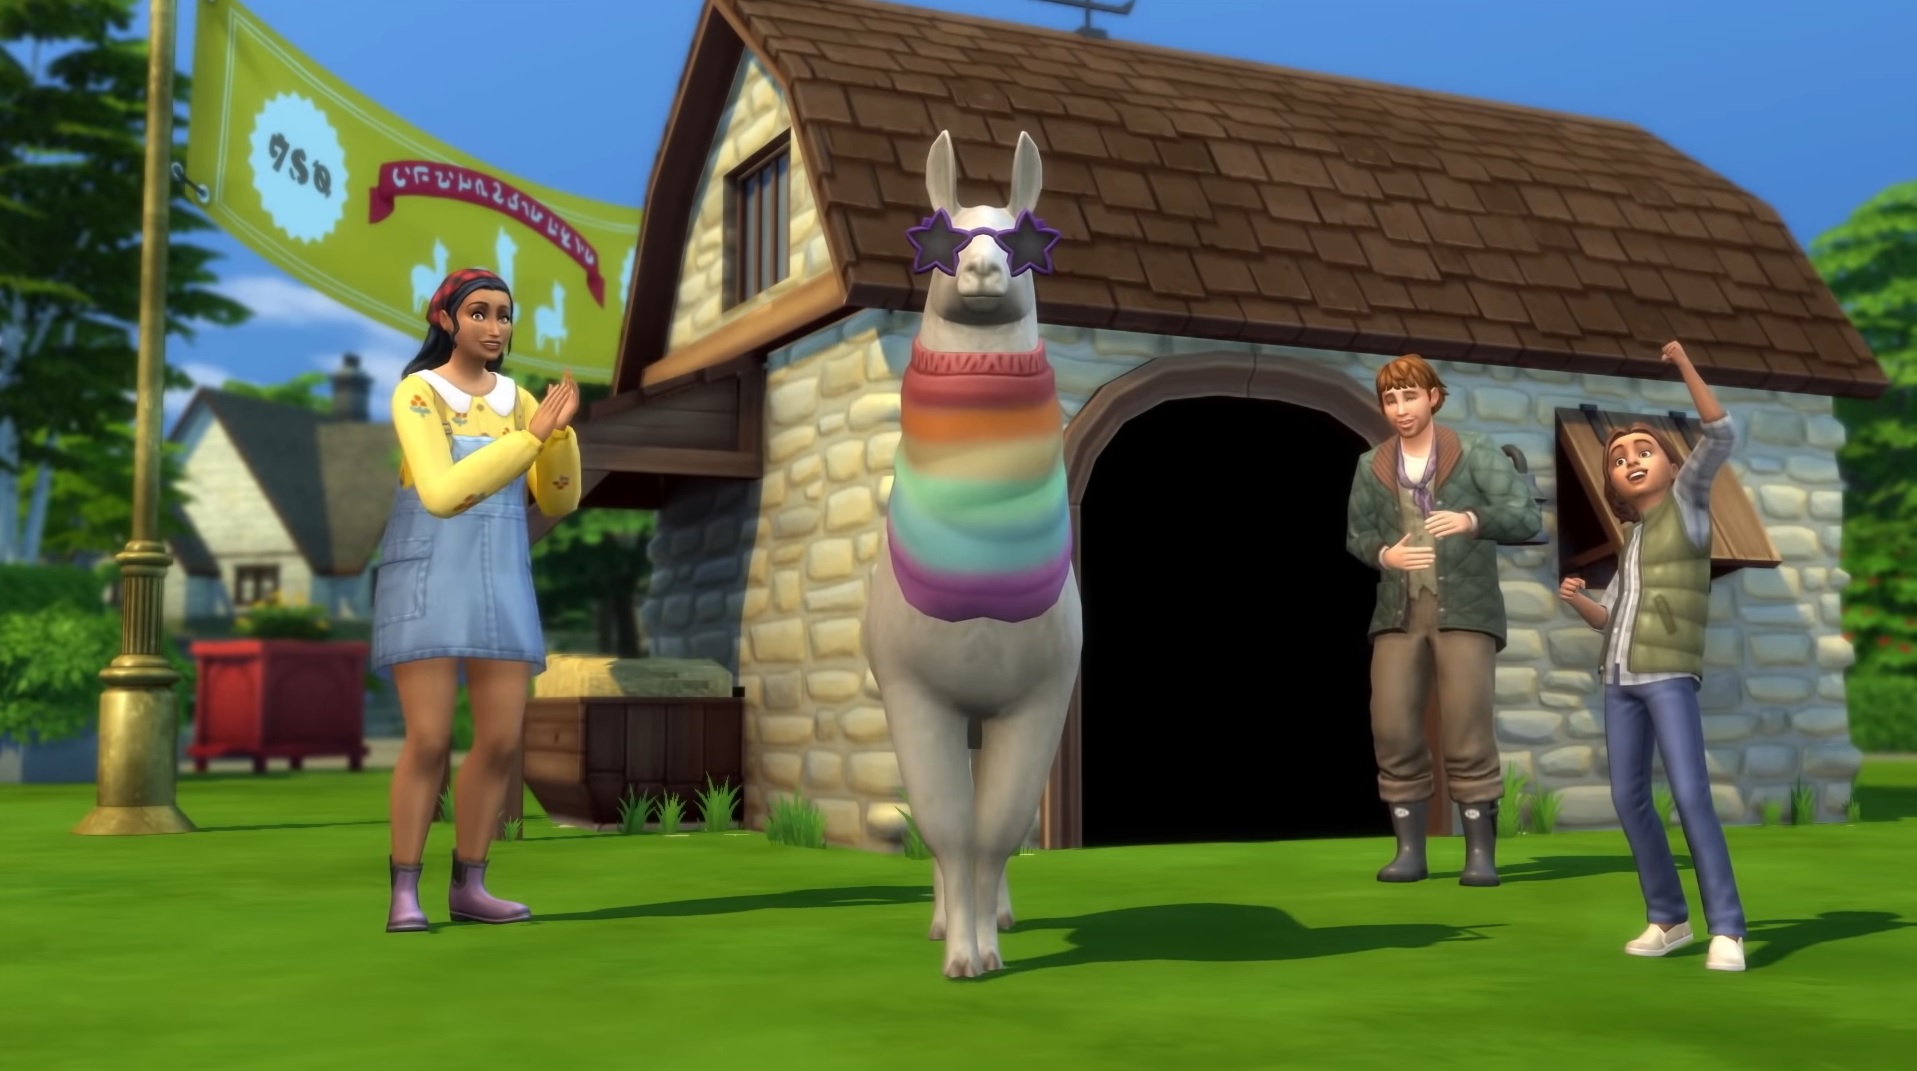 sims 4 expansions ranked reddit